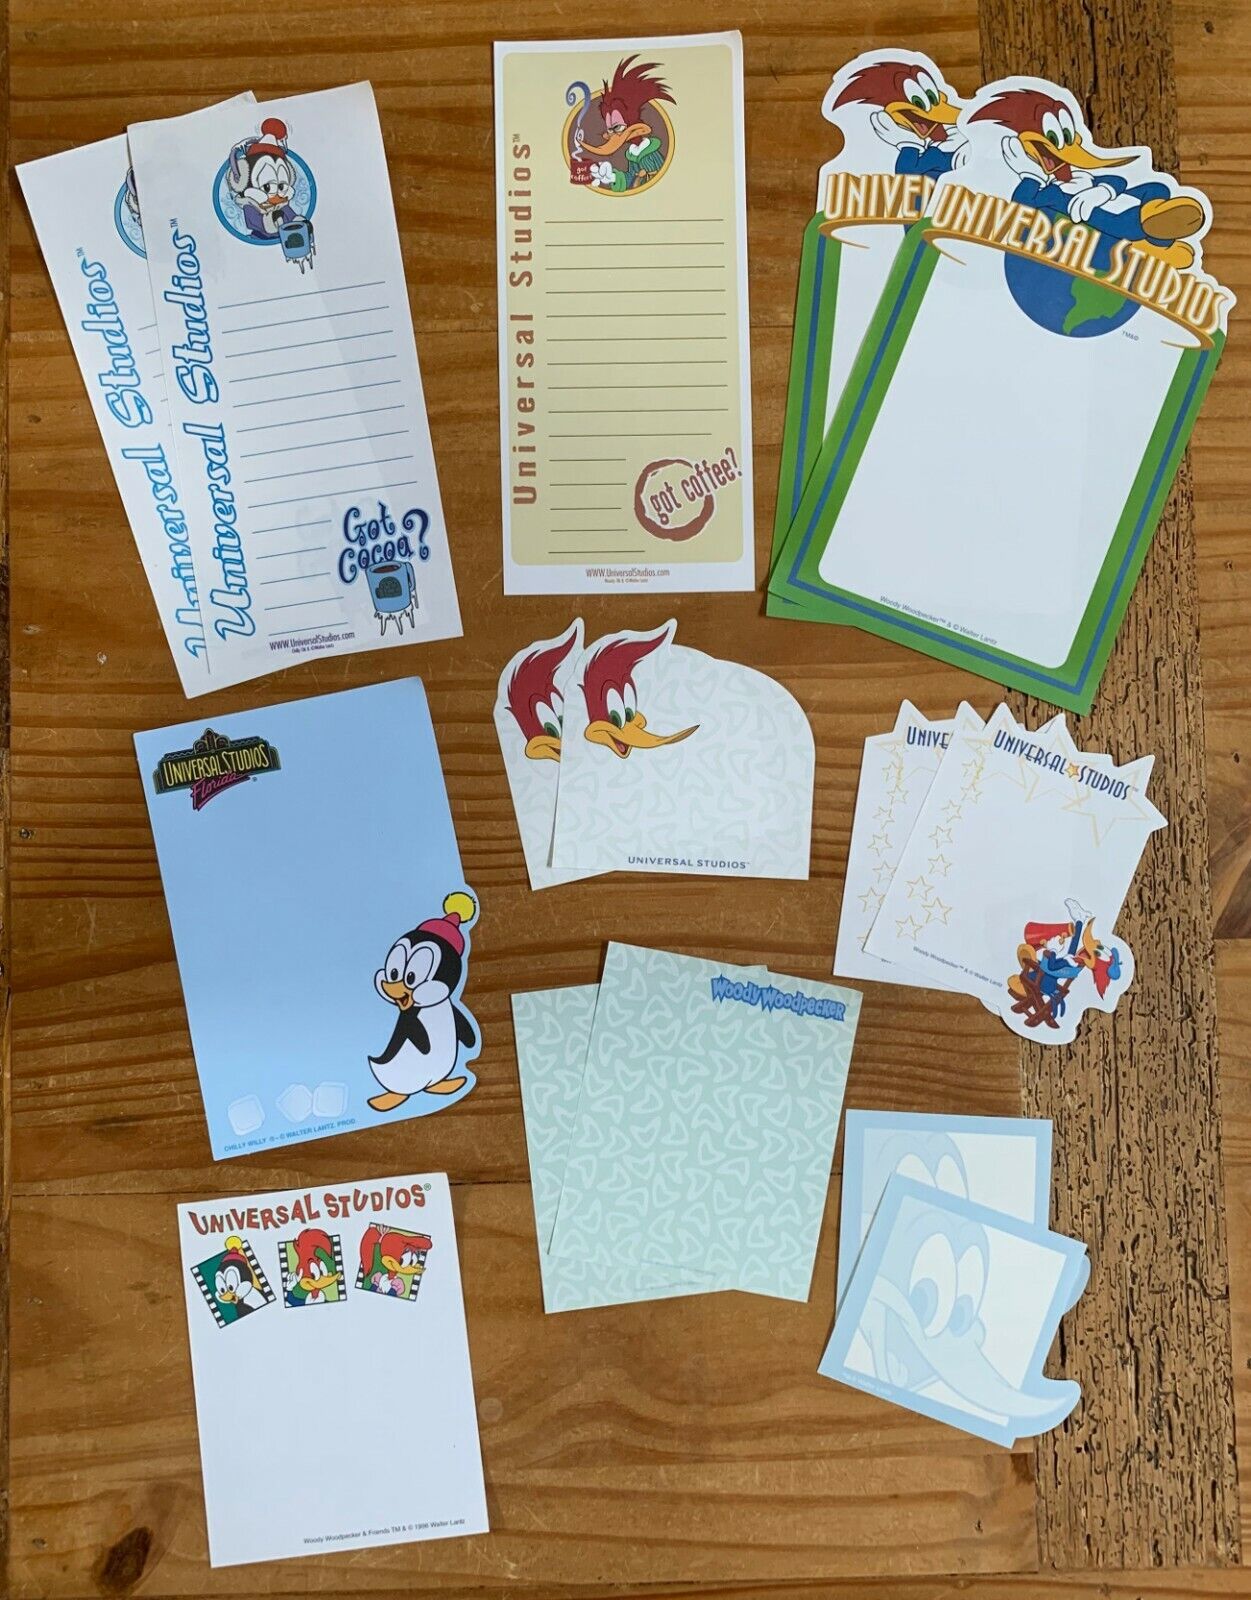 Woody Woodpecker Chilly Willy 15 Sheets Stationery / Stationary LOT MEMO Paper